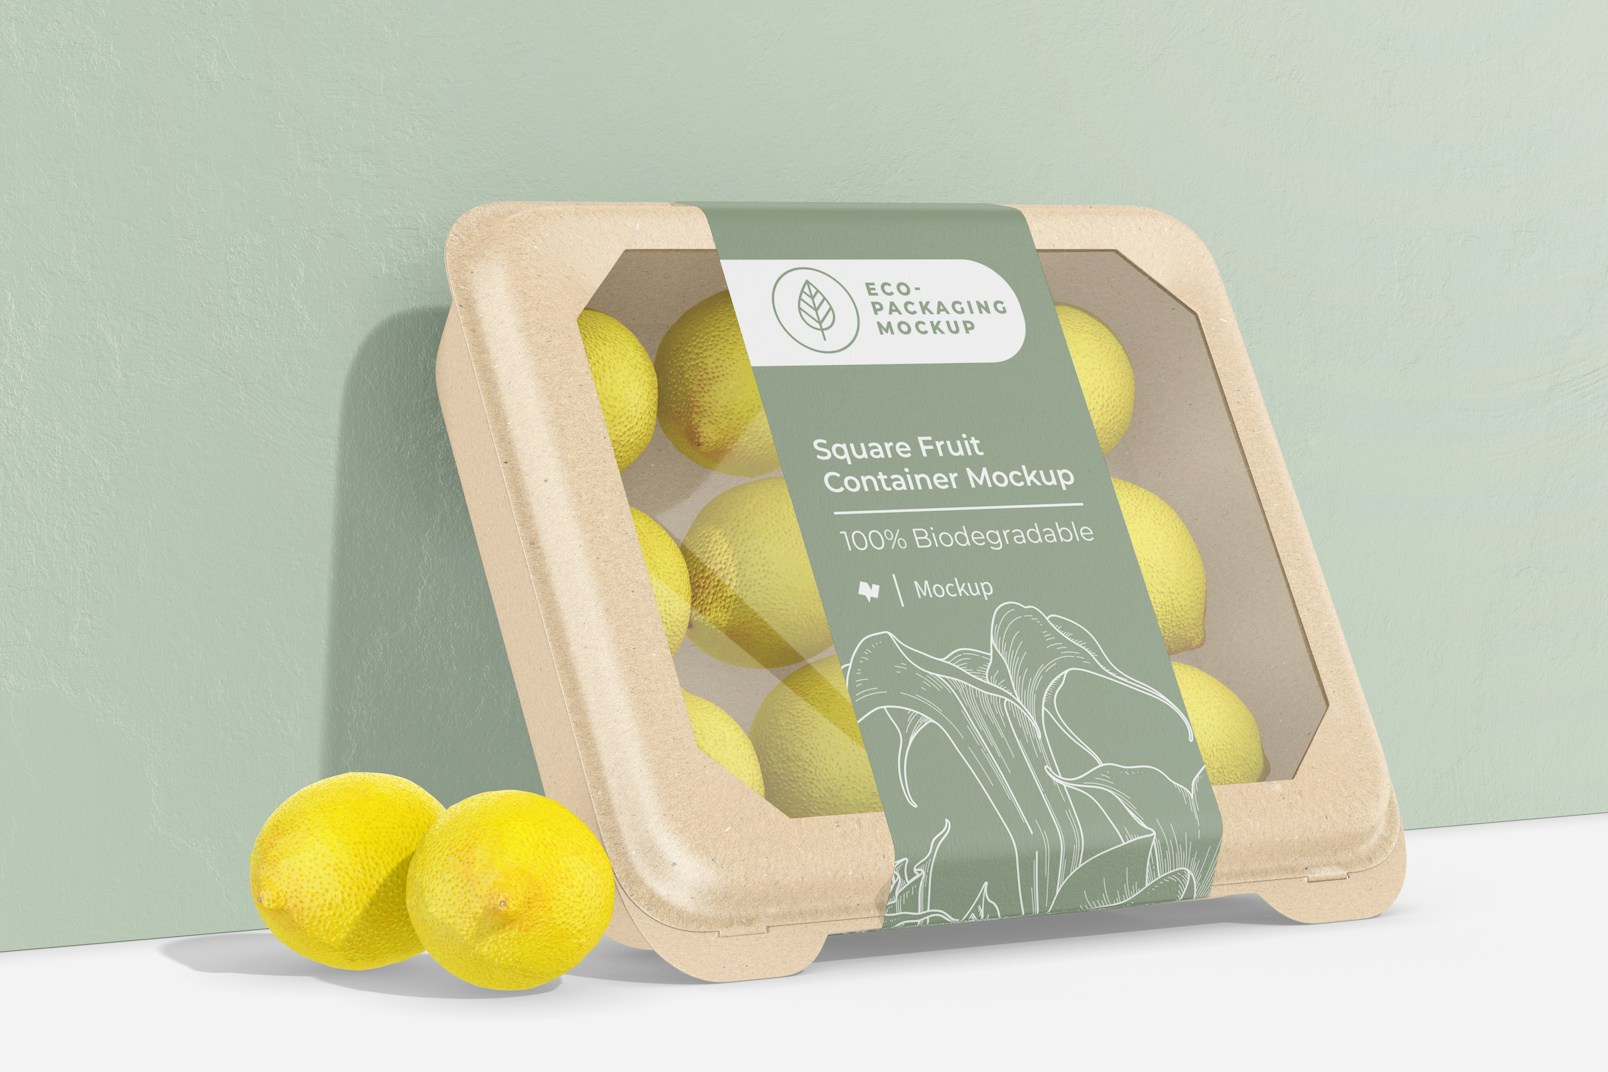 Square Fruit Container Mockup